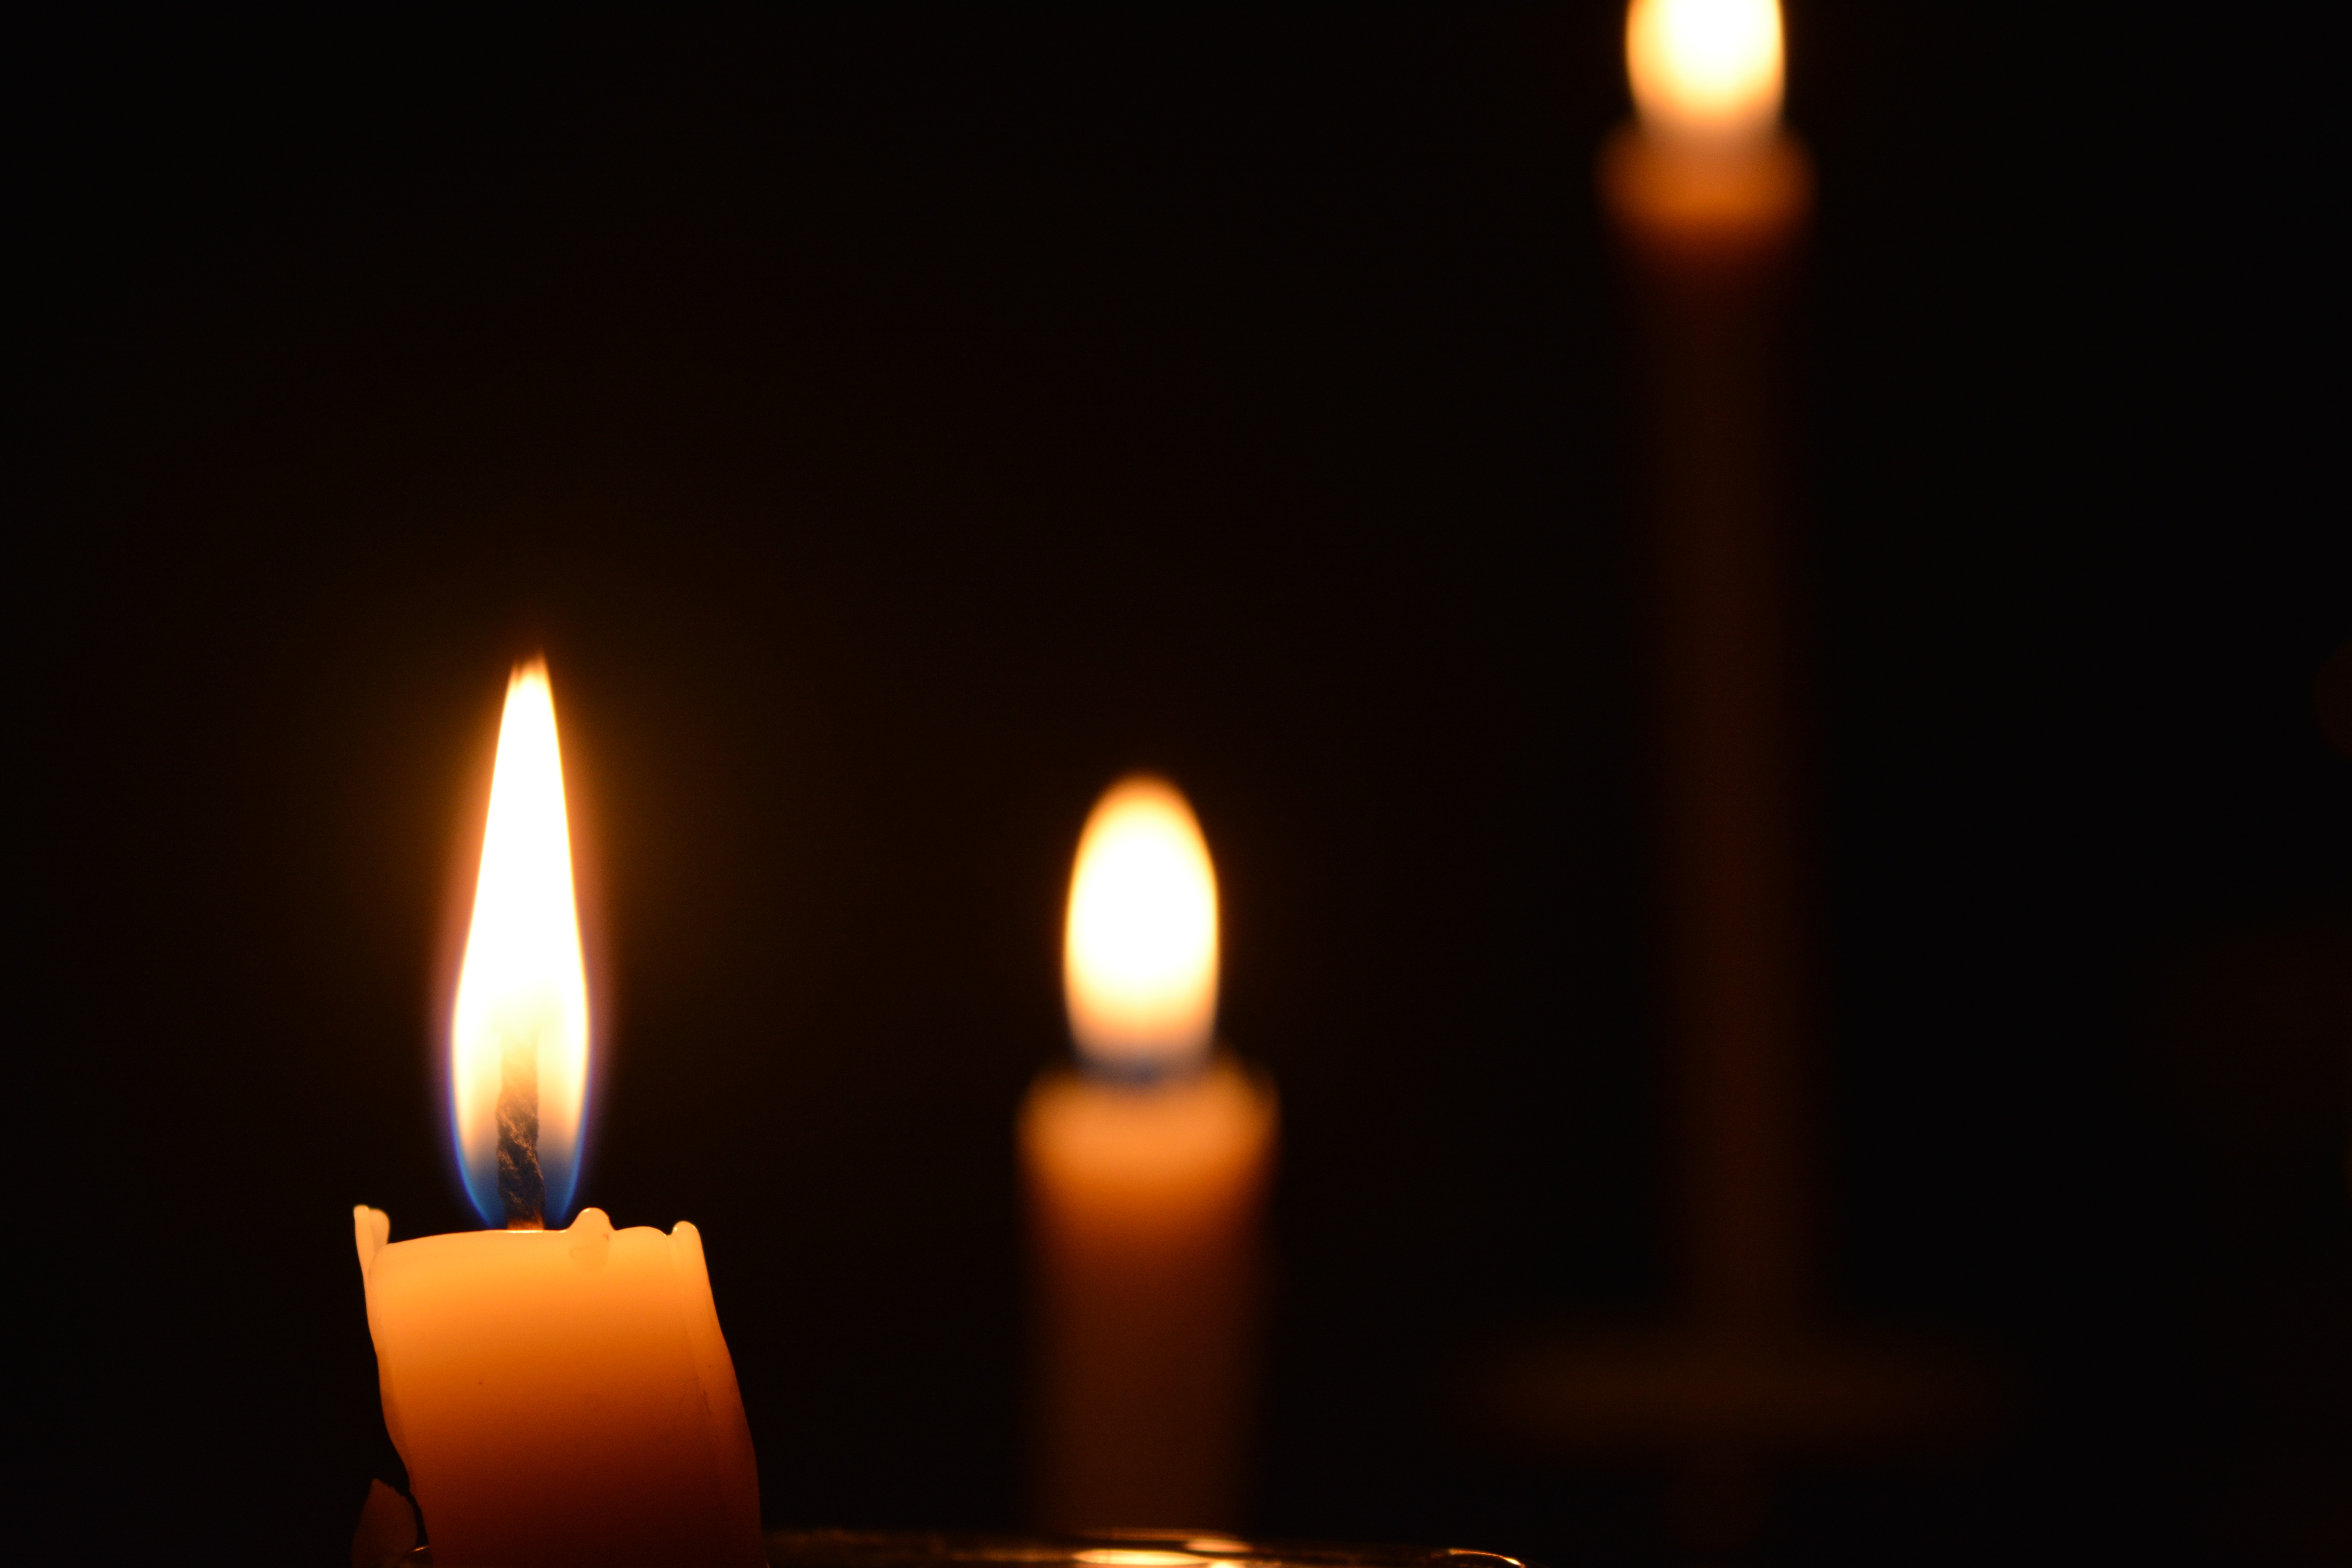 wax, fire, dark, darkness, candle, wick images